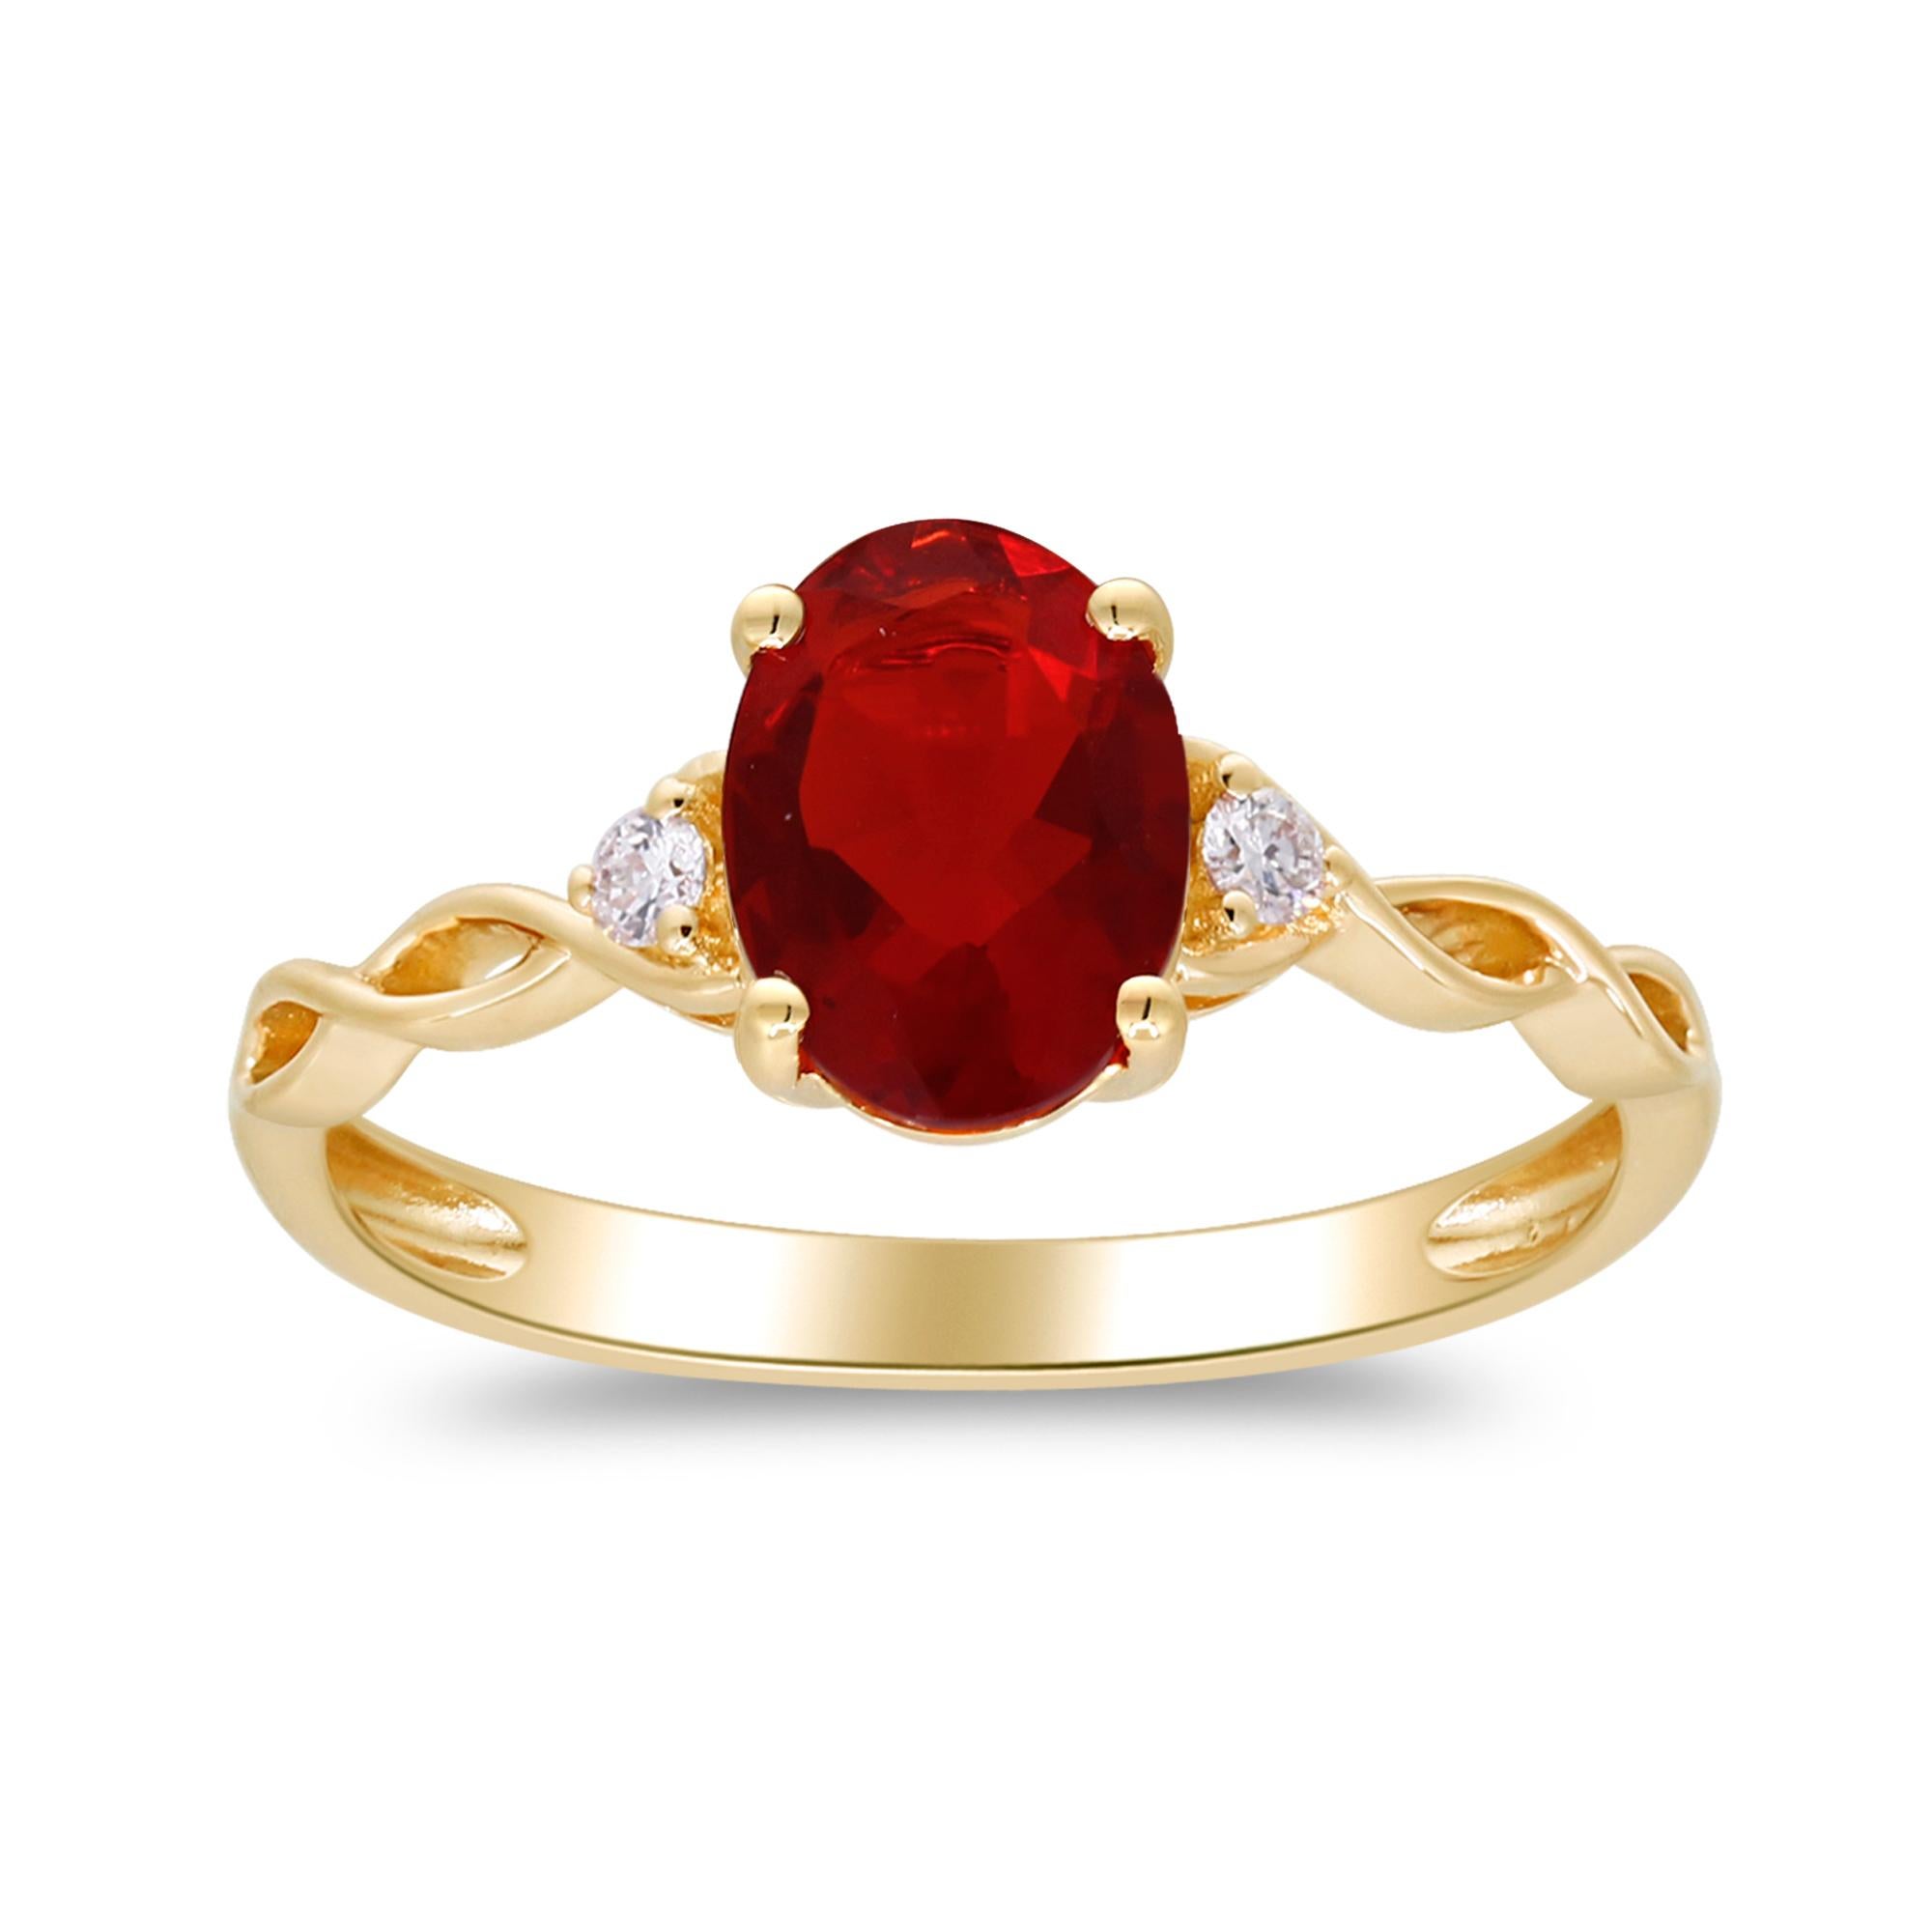 Stunning, timeless and classy eternity Unique Ring. Decorate yourself in luxury with this Gin & Grace Ring. The 14K Yellow Gold jewelry boasts 8x6 mm (1 pcs) 0.85 carat Oval-Cut Prong Setting Fire Opal, along with Natural Round-cut white Diamond (2